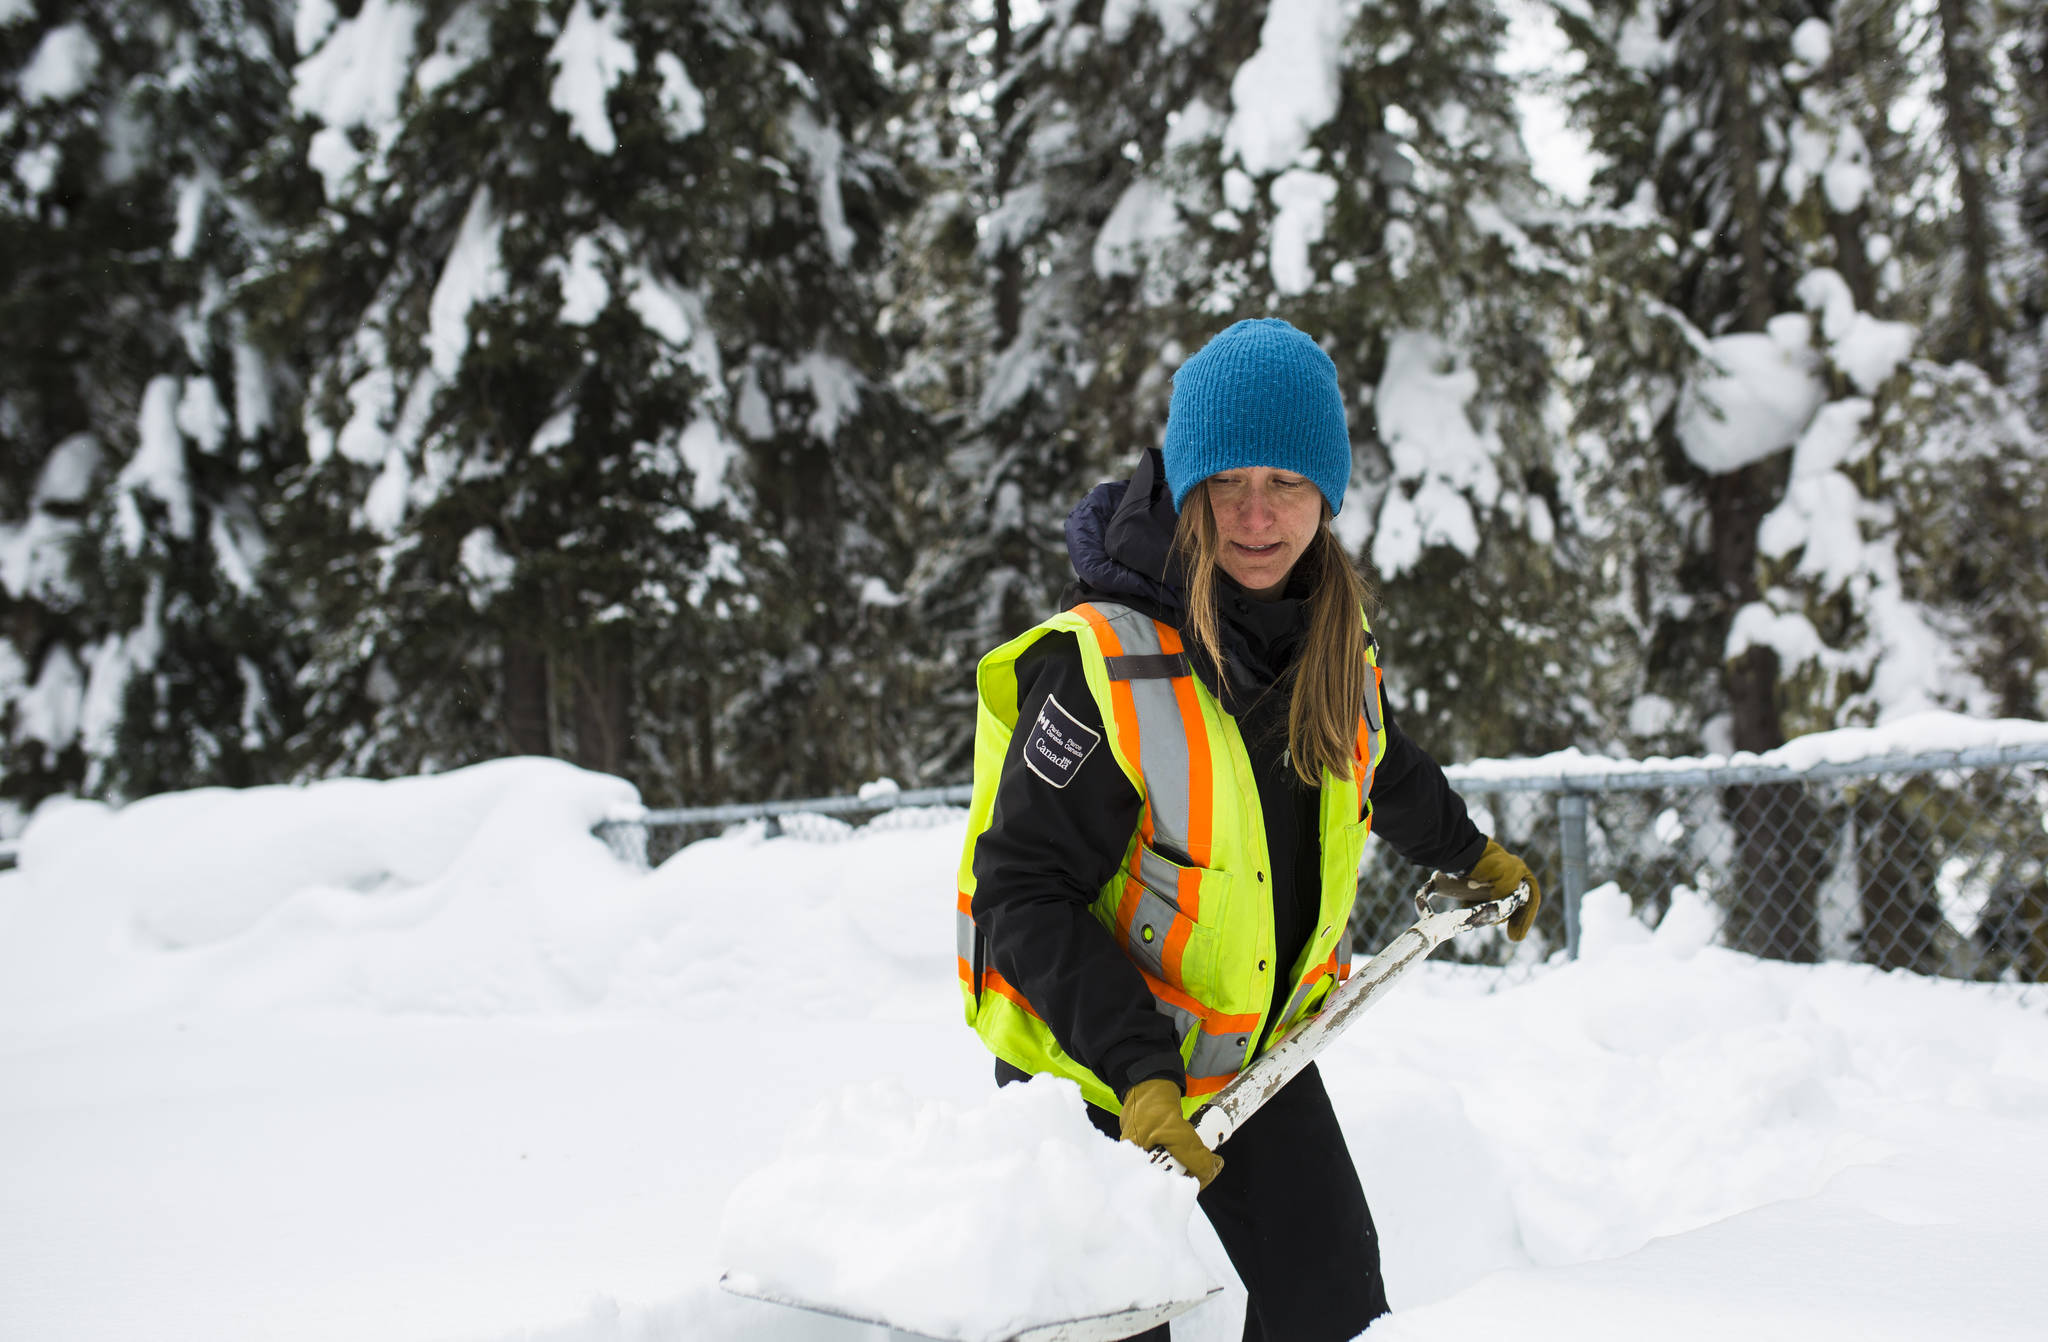 11269718_web1_180306-RTR-avalanche-parks-canada23